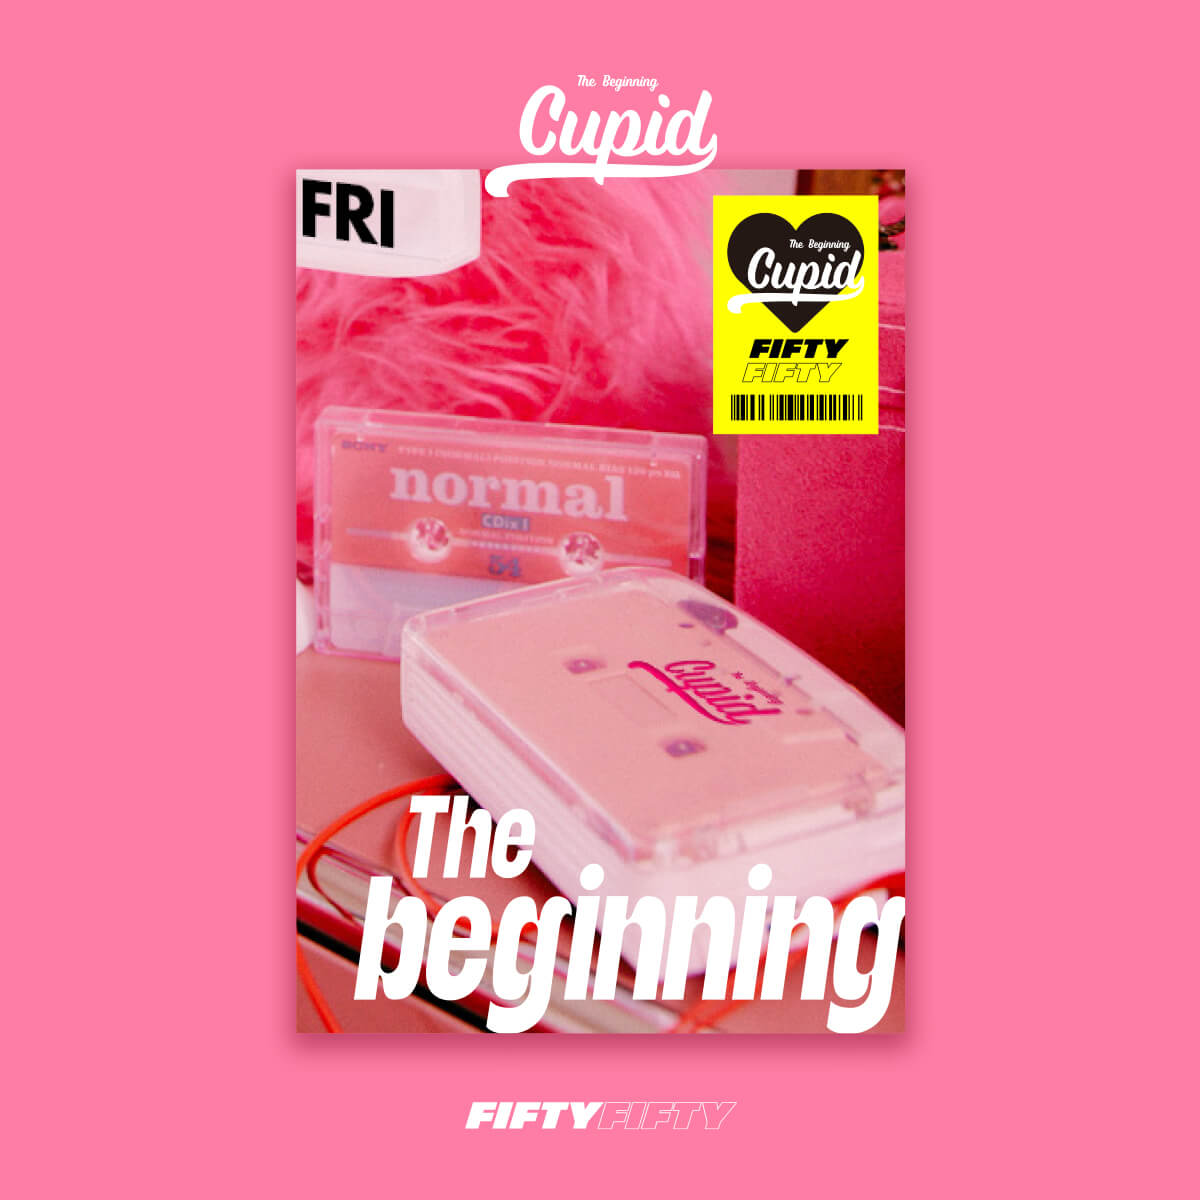 FIFTY FIFTY 1st Single Album The Beginning: Cupid - NERD Version